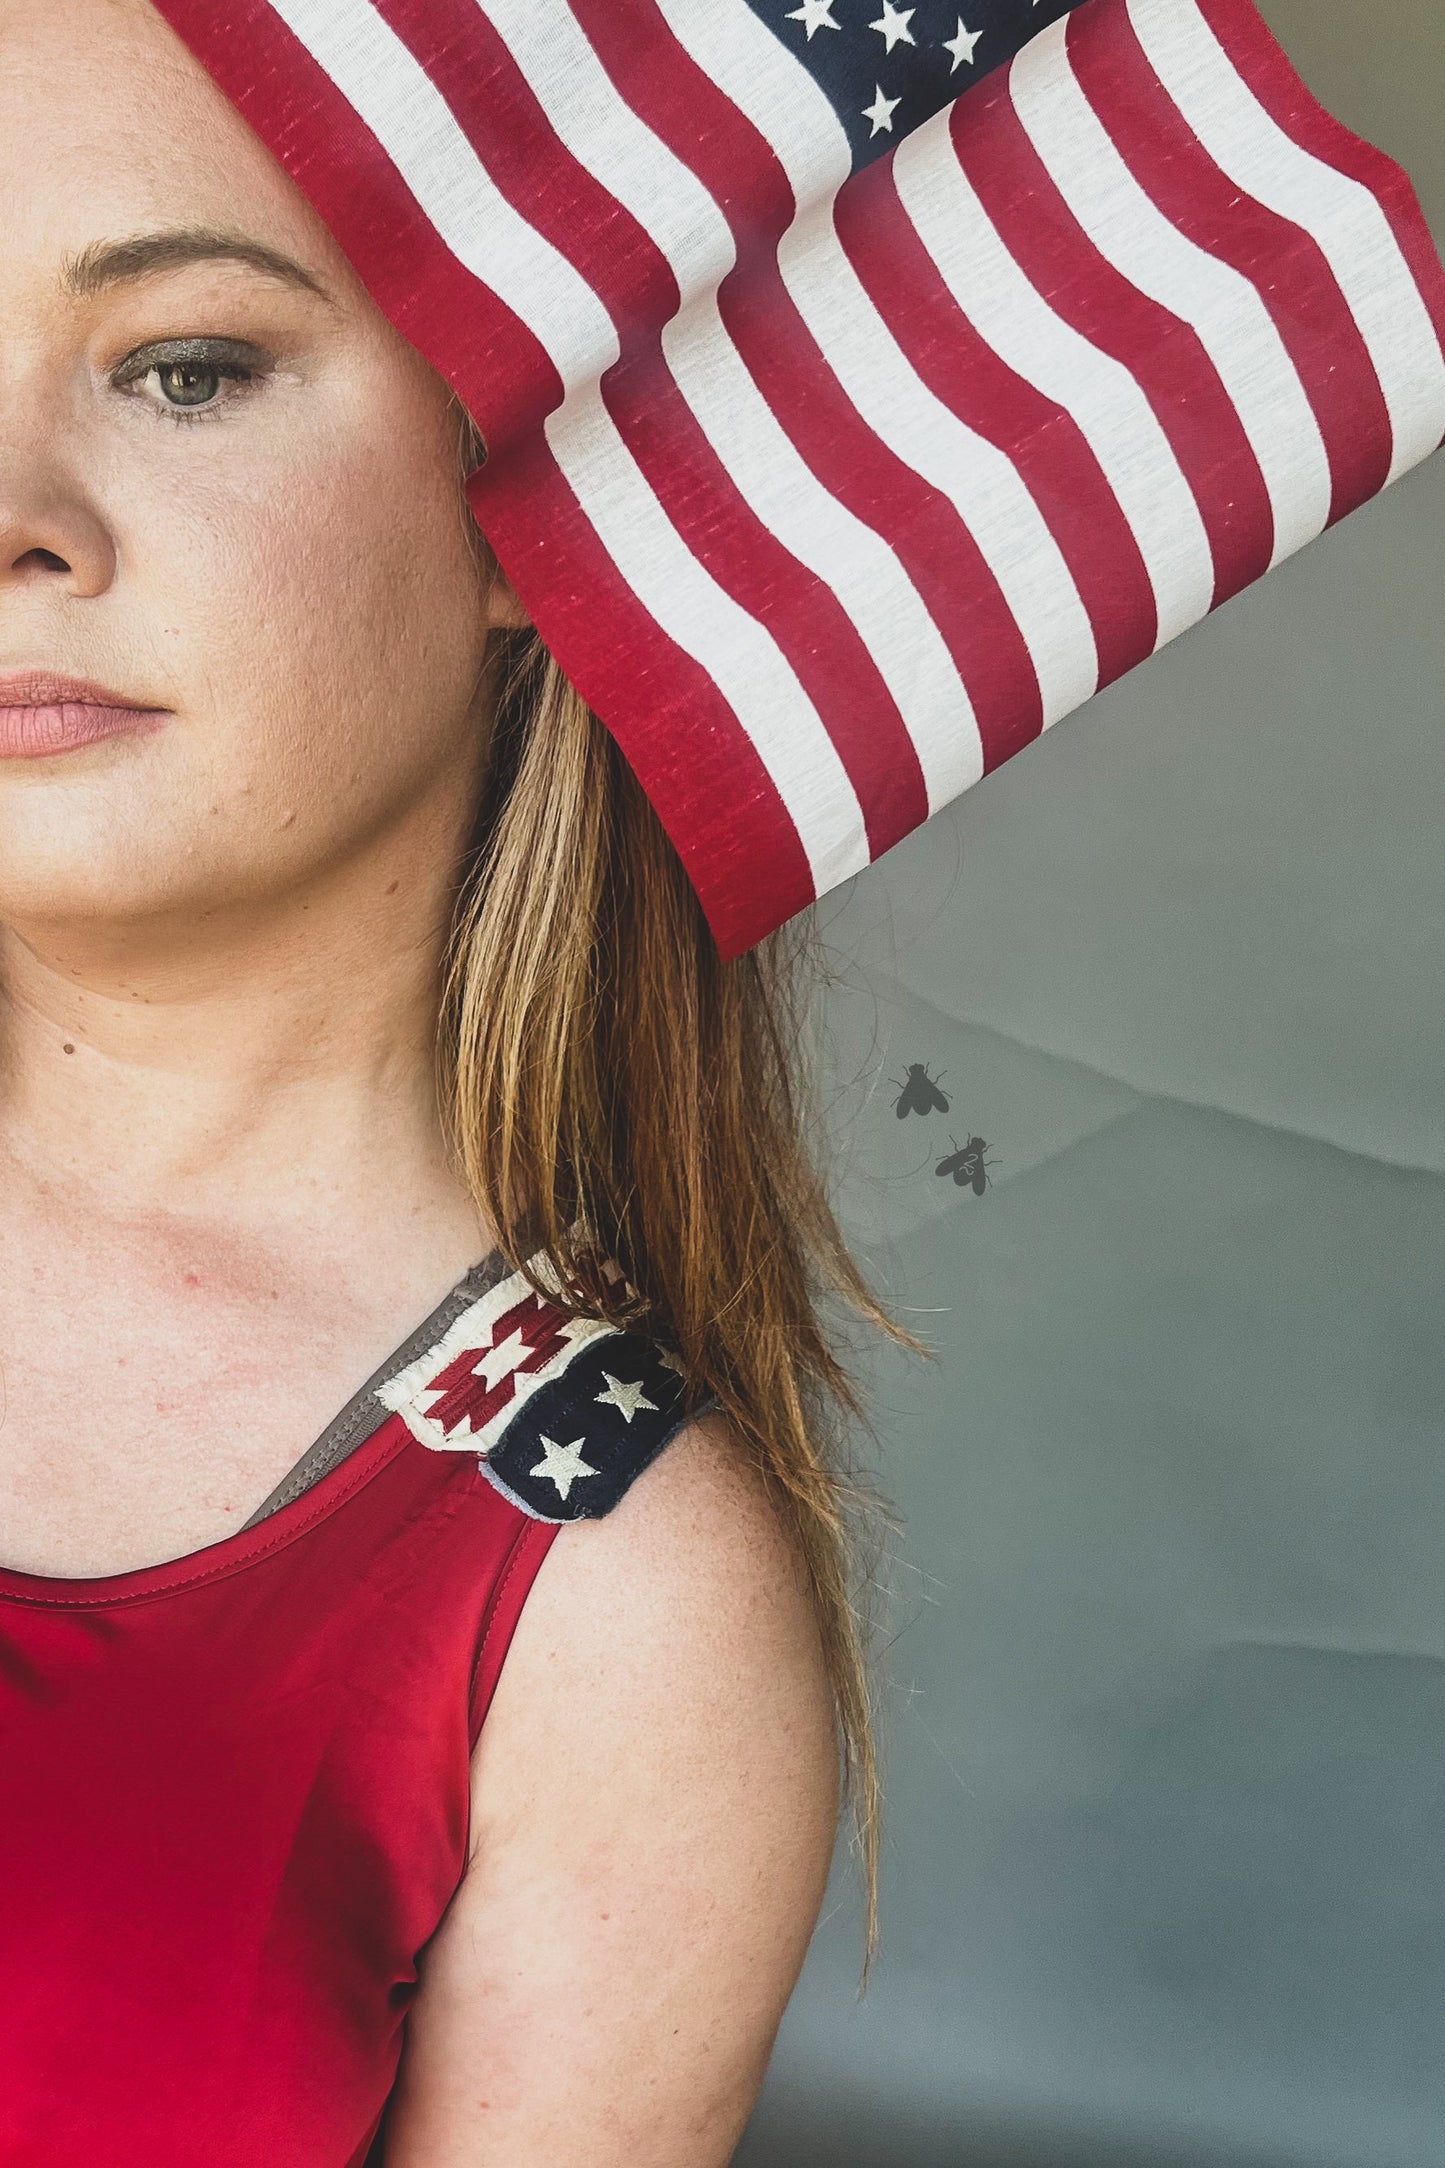 The Betsy Ross Tank Top